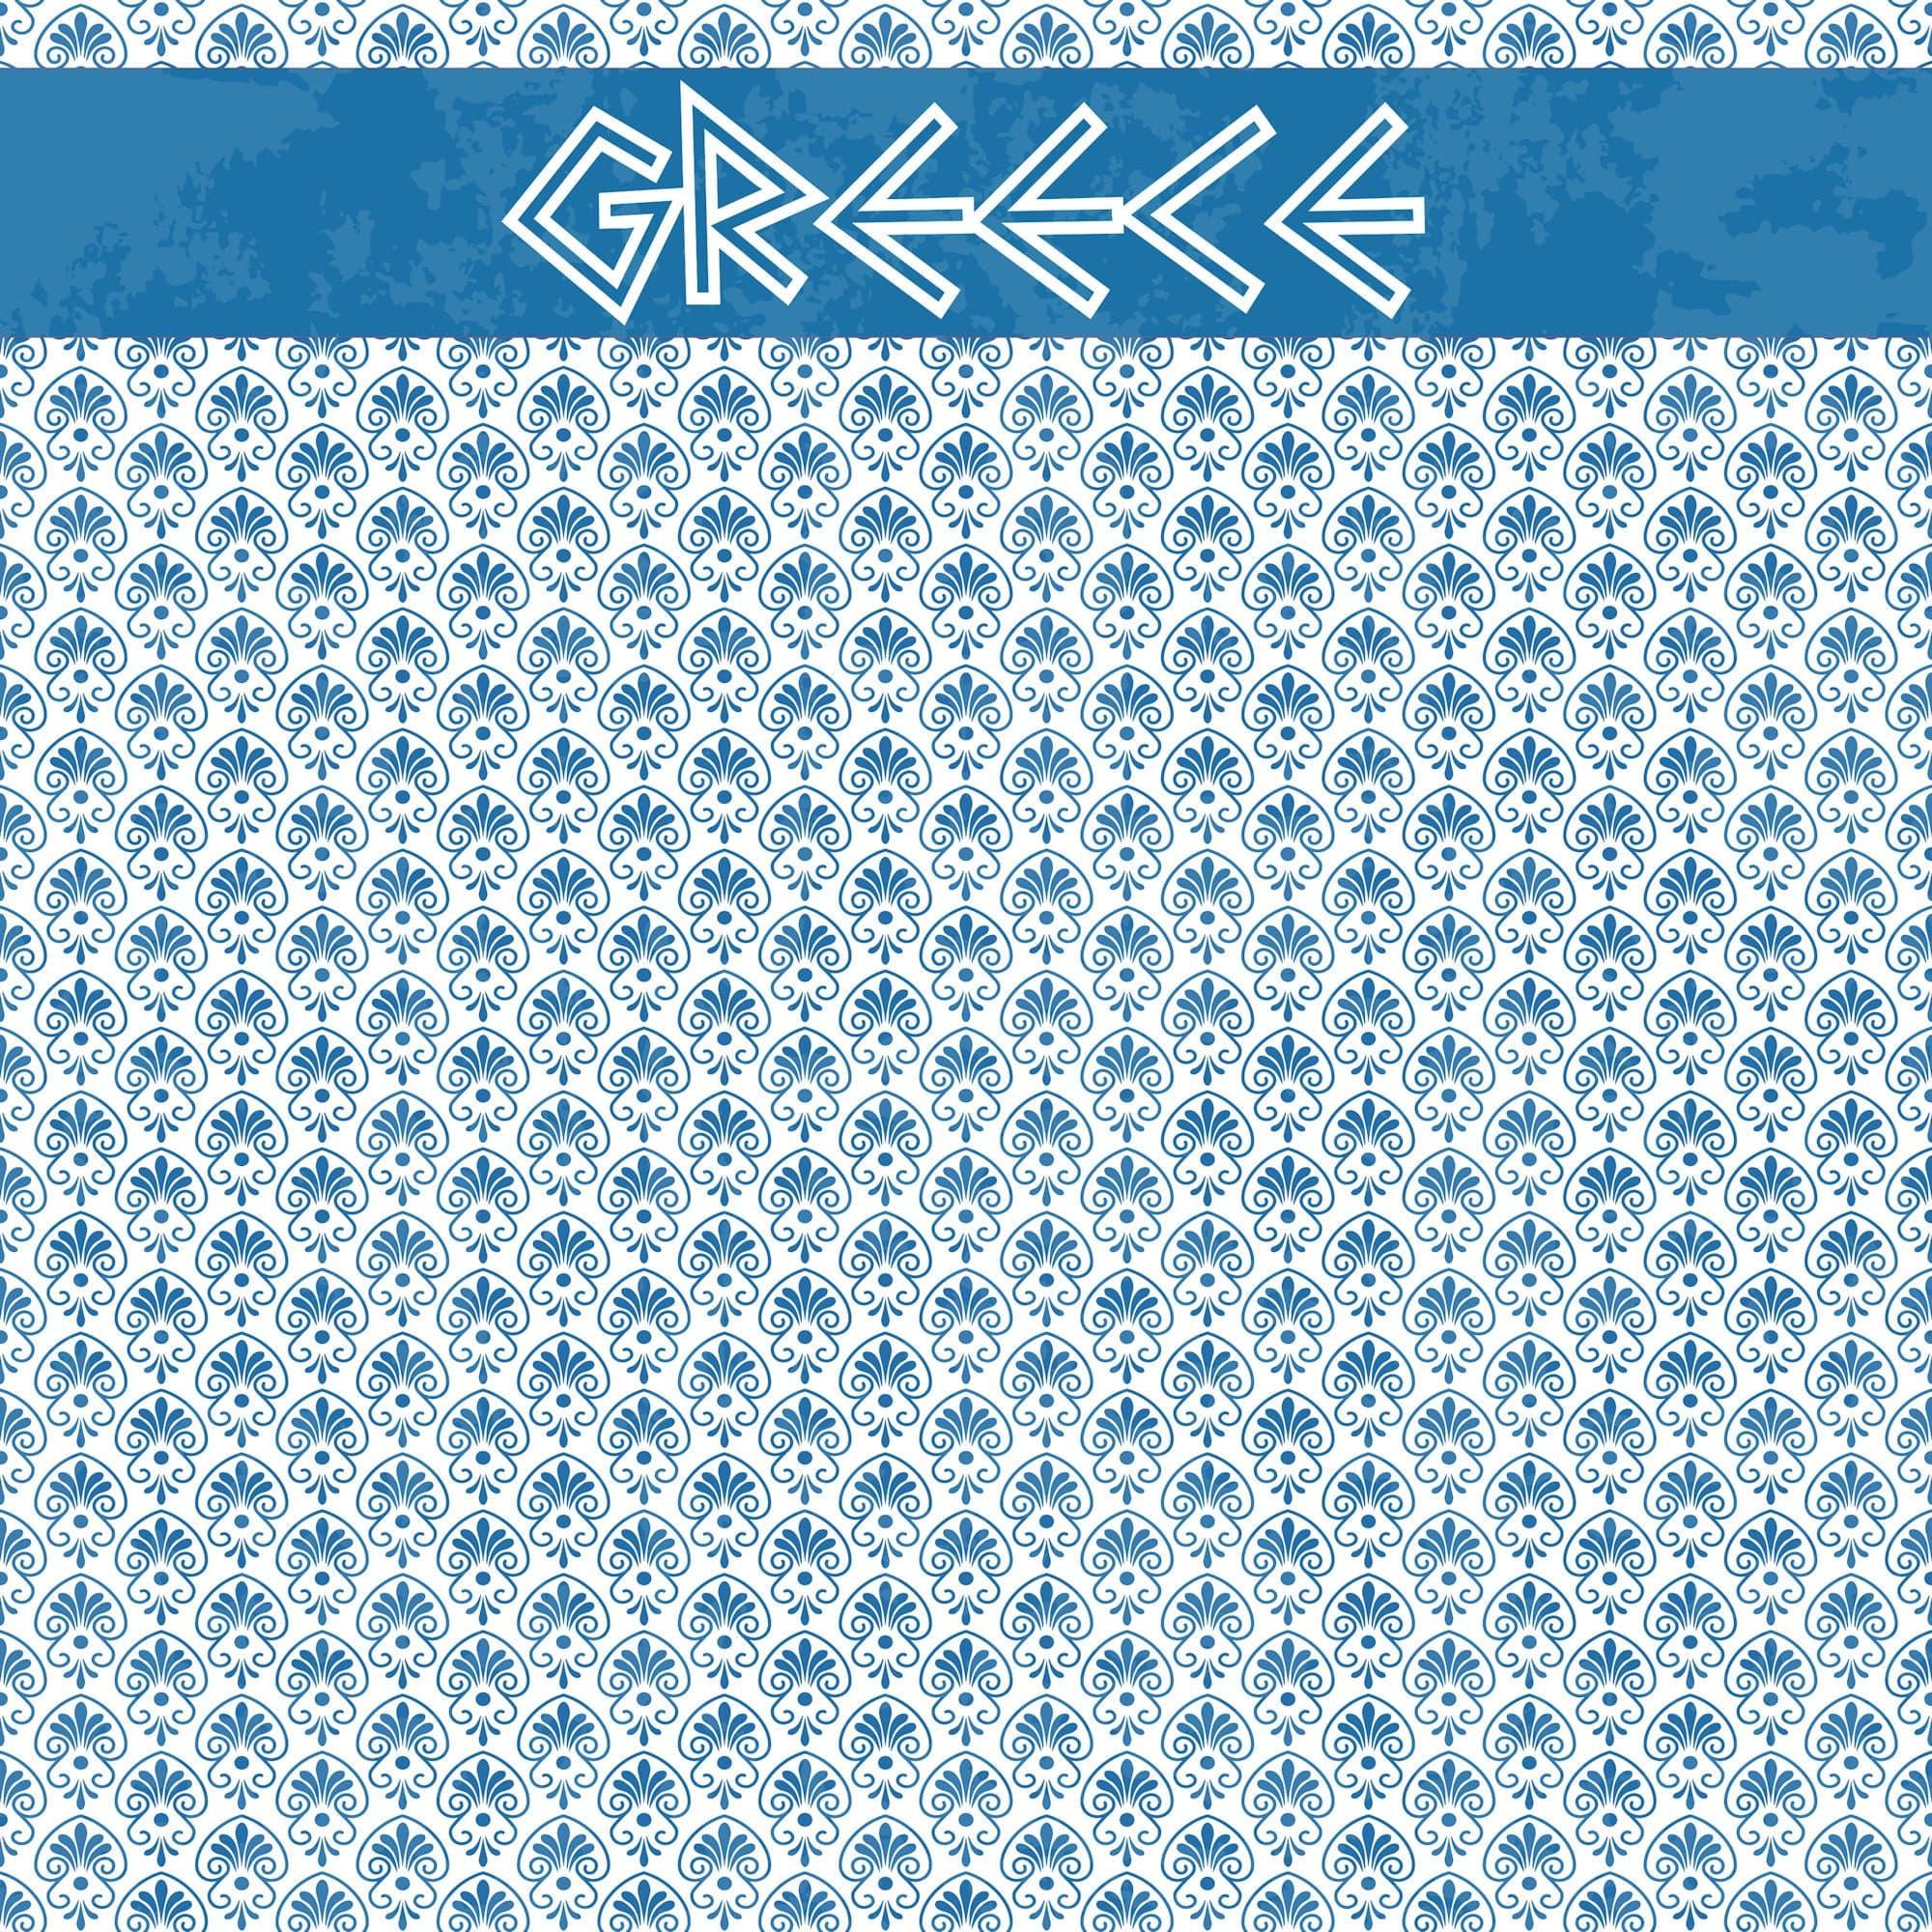 Greece Collection Greece 12 x 12 Double-Sided Scrapbook Paper by SSC Designs - Scrapbook Supply Companies